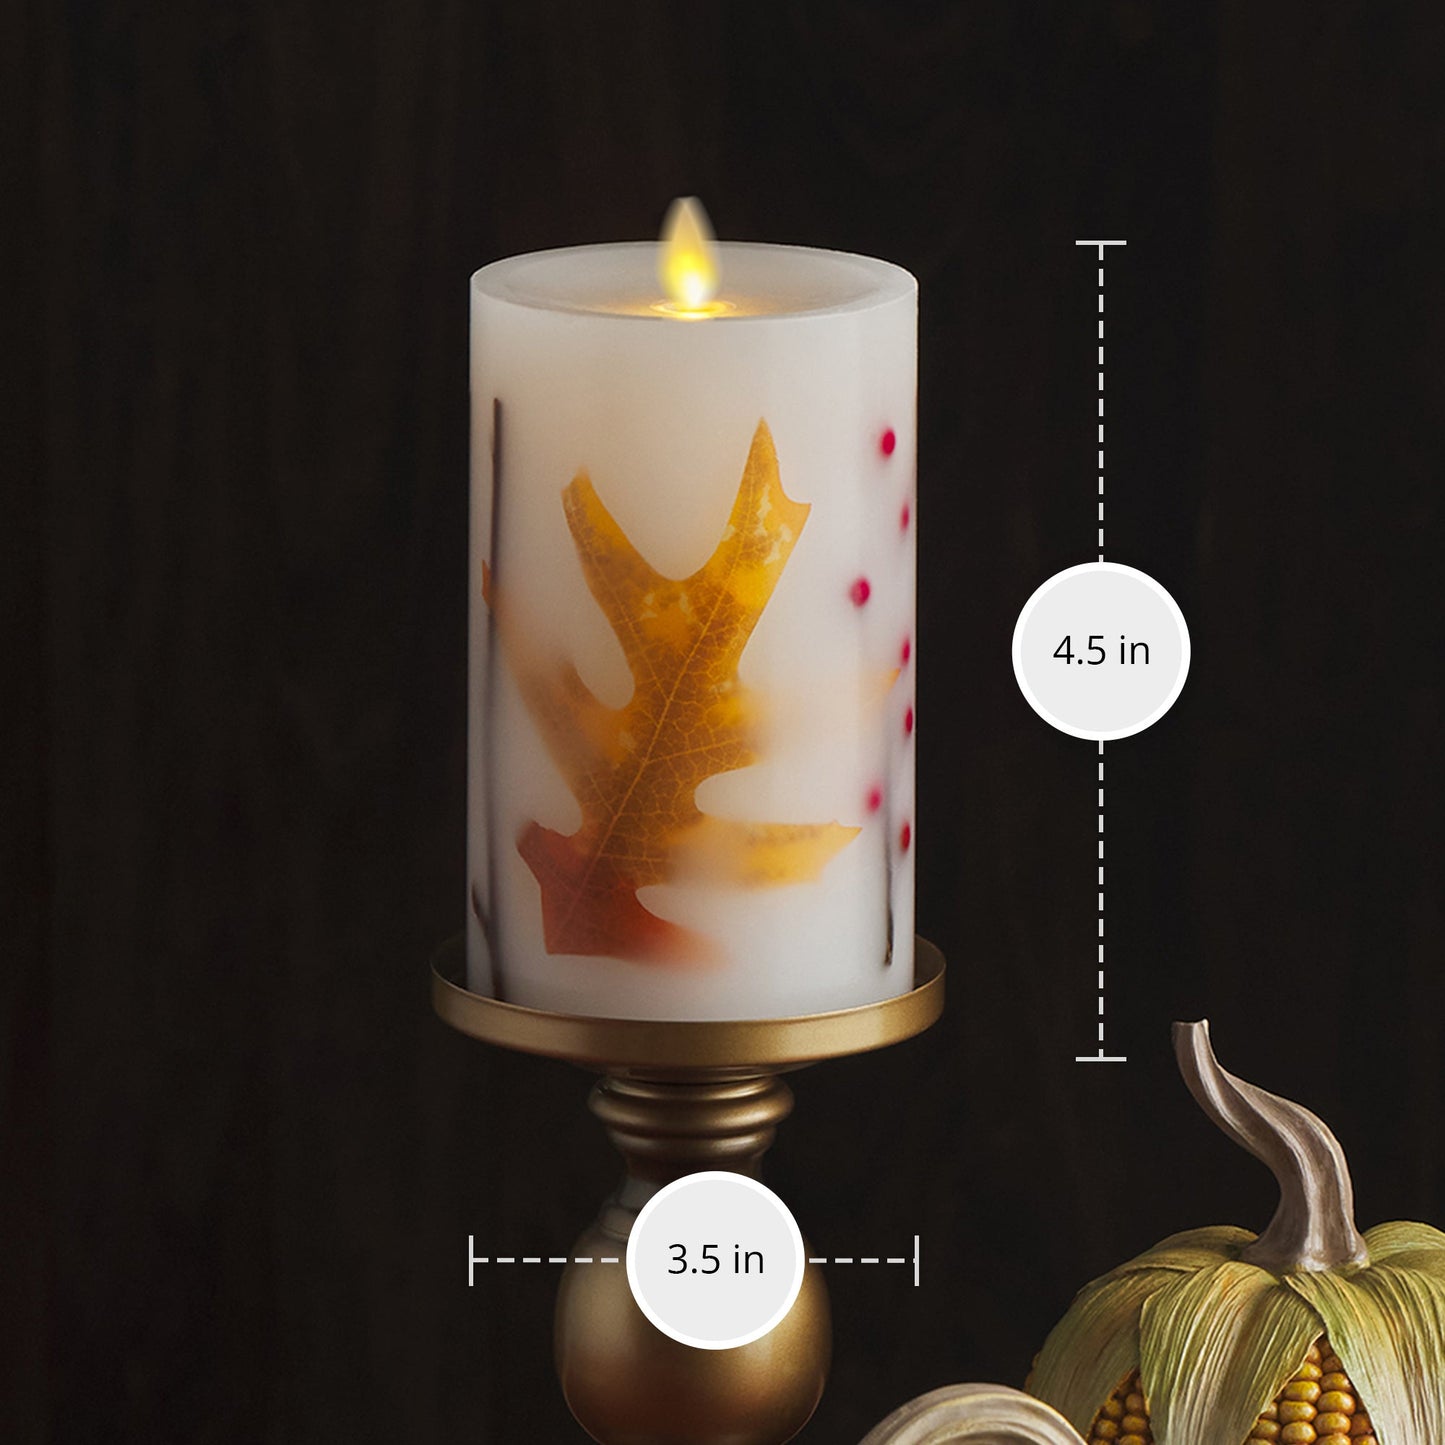 Embedded Fall Leaves & Twigs Flameless Candle Pillar - Recessed Top